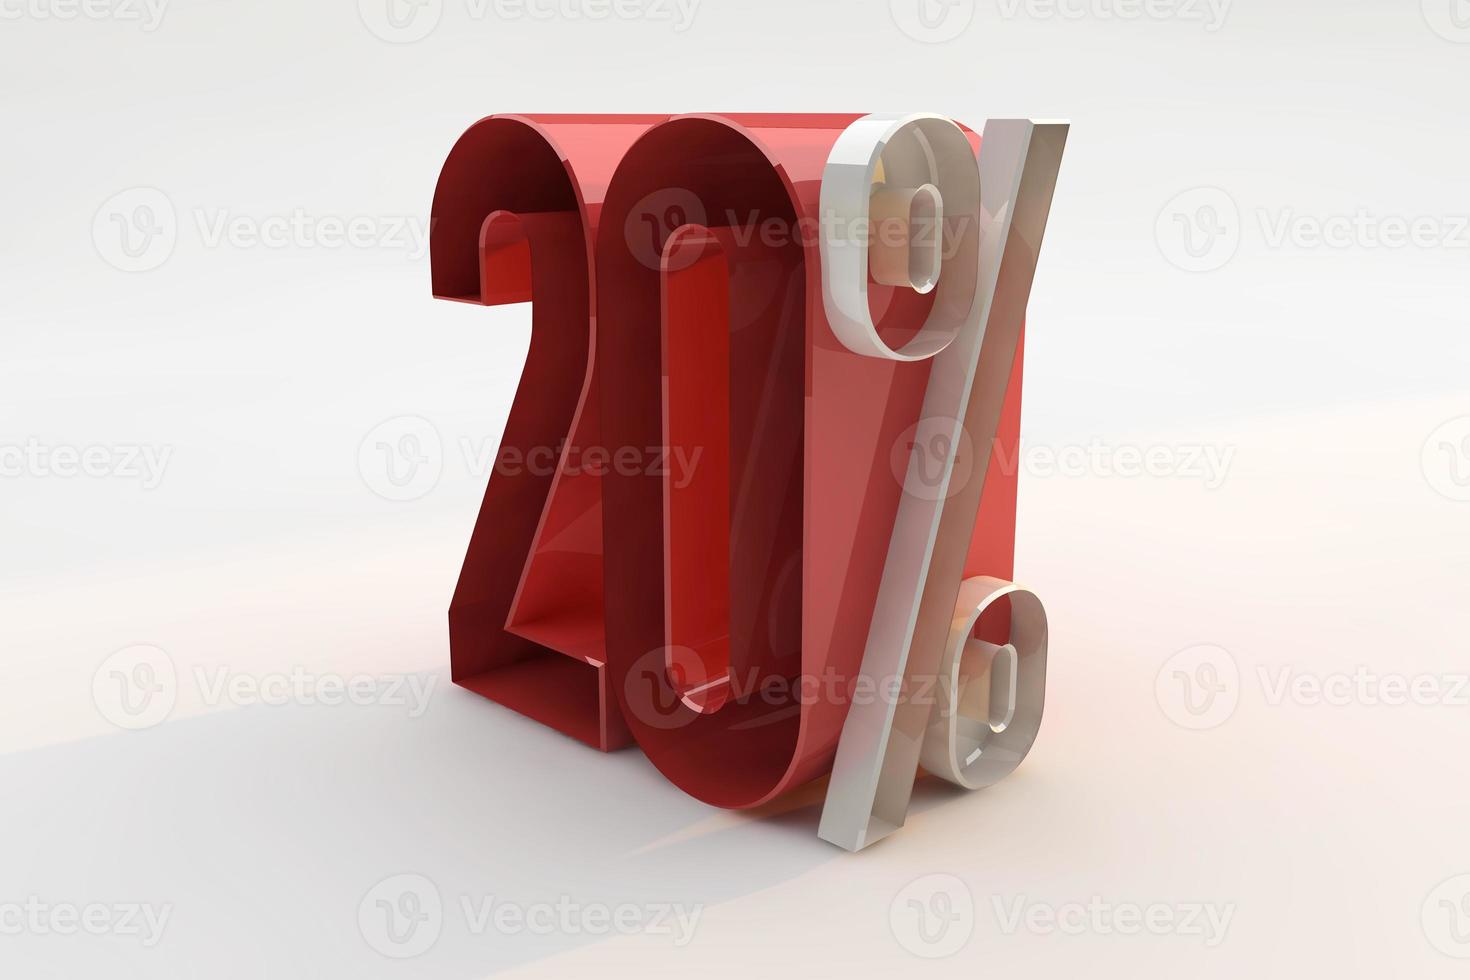 20 percent sign 3d number red photo